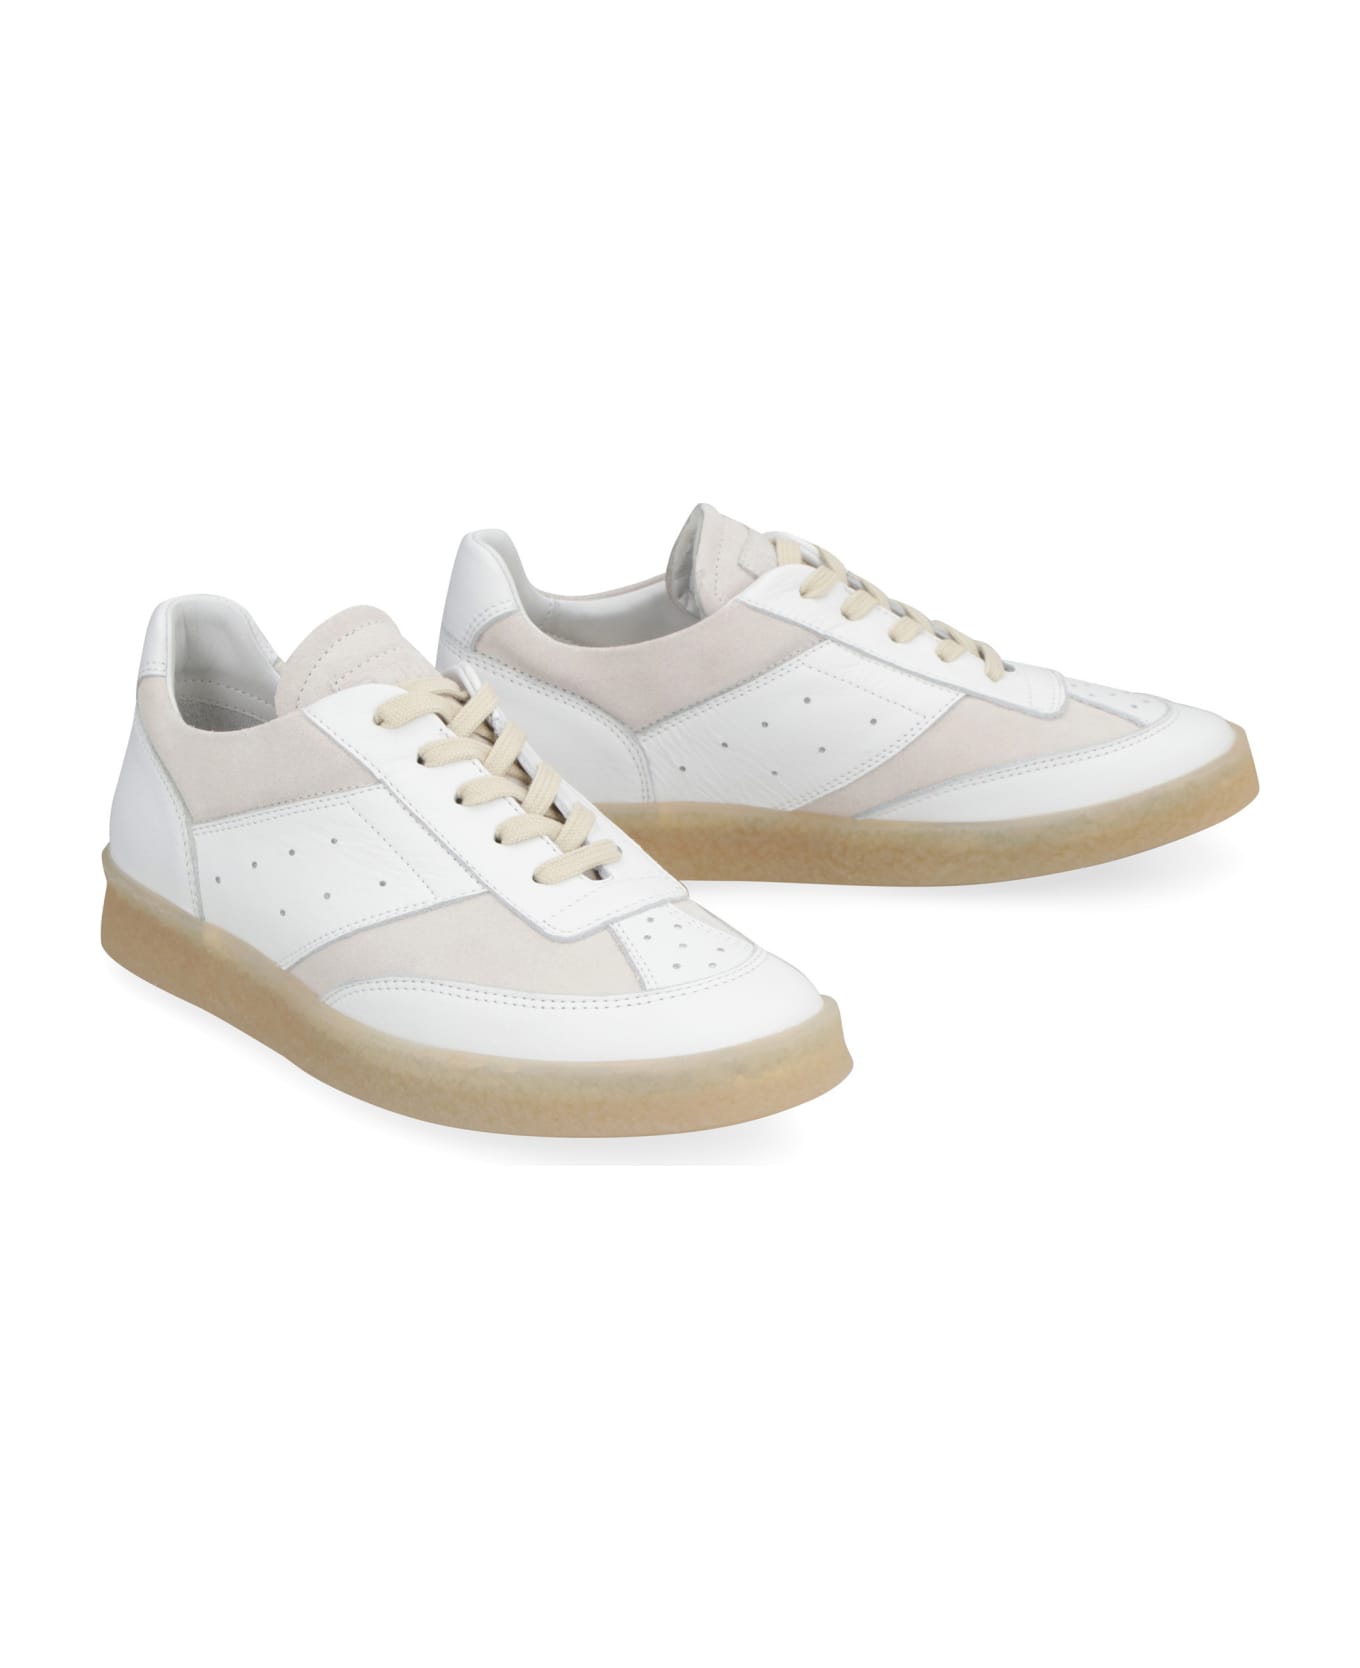 MM6 Maison Margiela Leather And Suede Sneakers - White